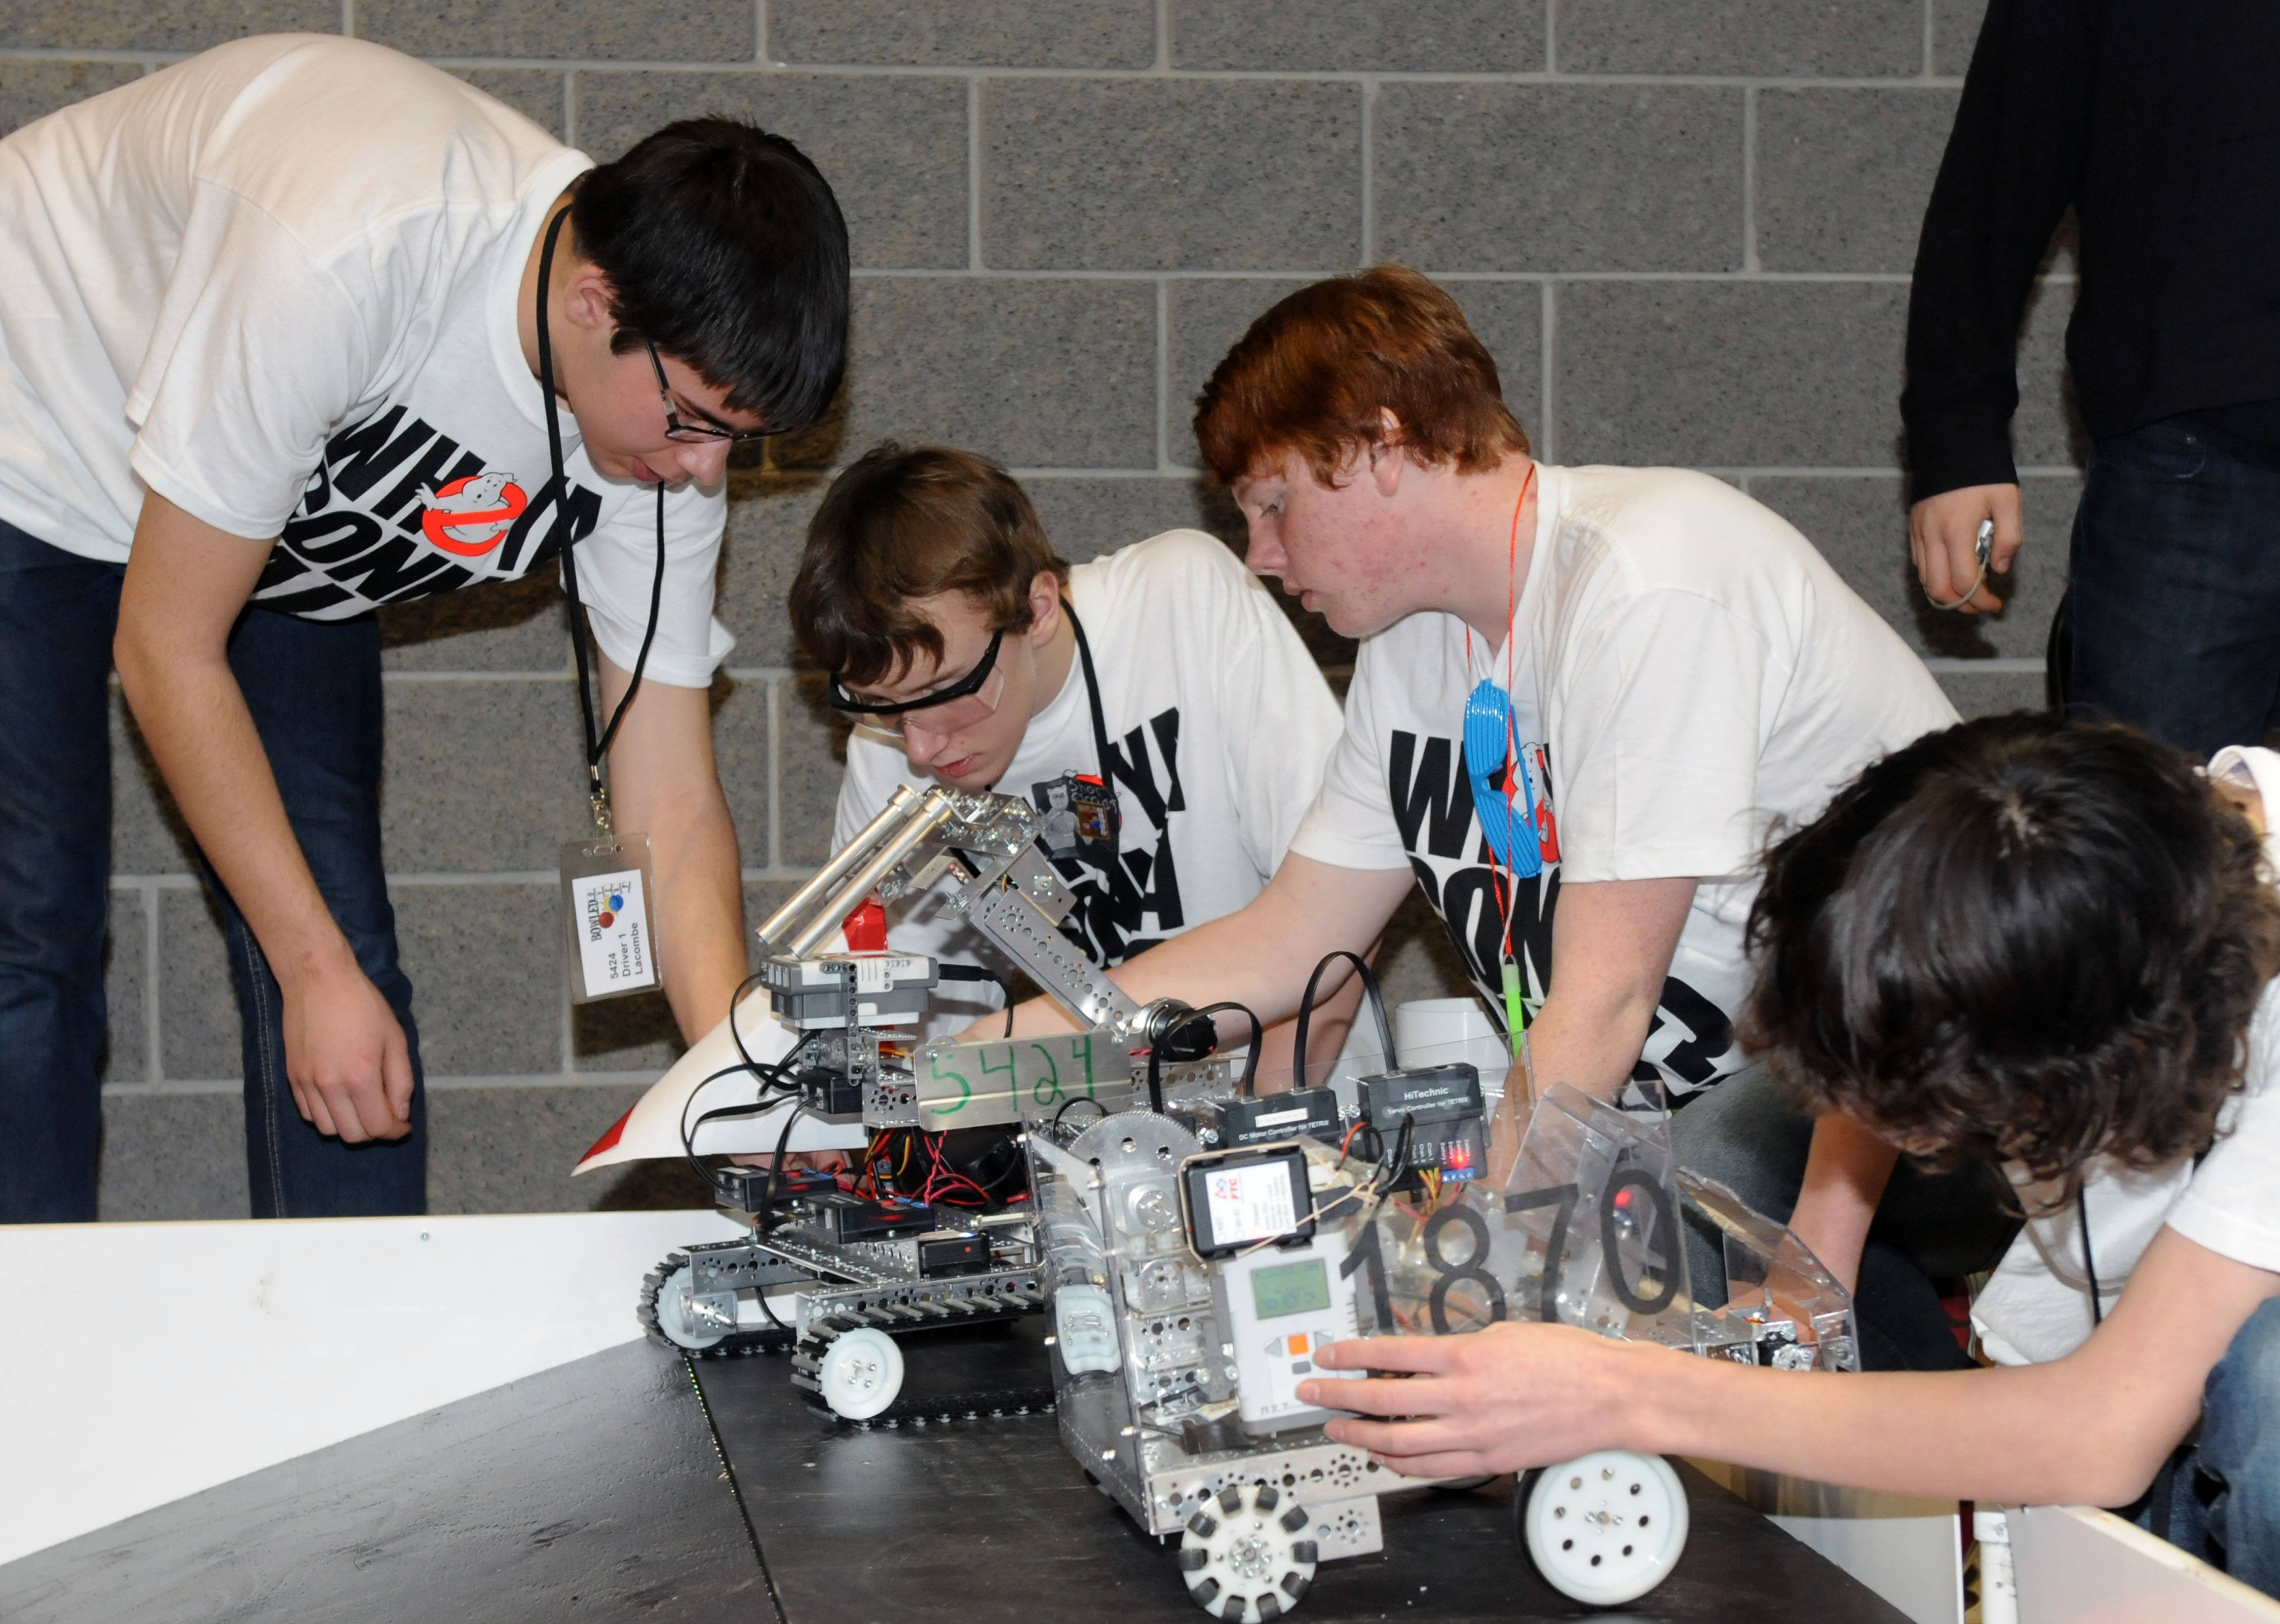 CHALLENGING BATTLES- The fifth annual Alberta Robotics Championships were held this past weekend at Red Deer College with many teams showing off their engineering skills.